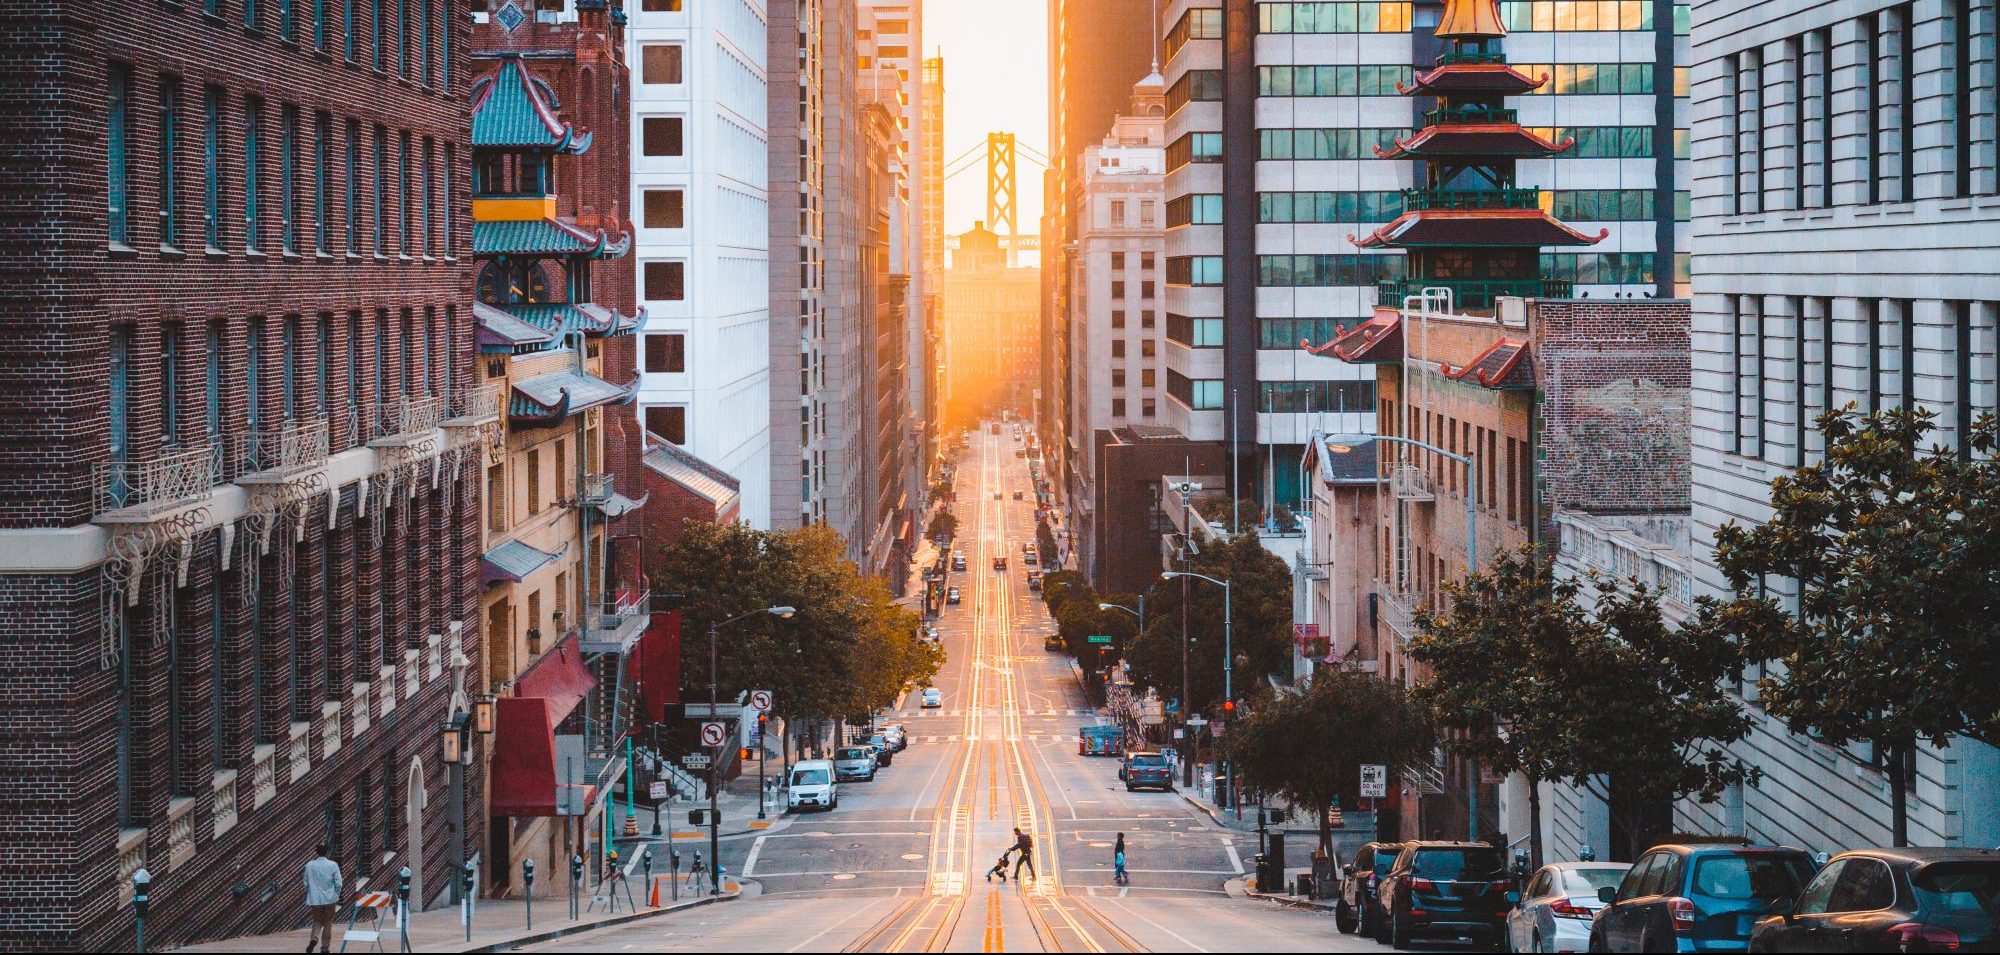 Downtown San Francisco. If you’re looking for legal guidance with your retaliation claim, meet with a San Francisco retaliation lawyer.